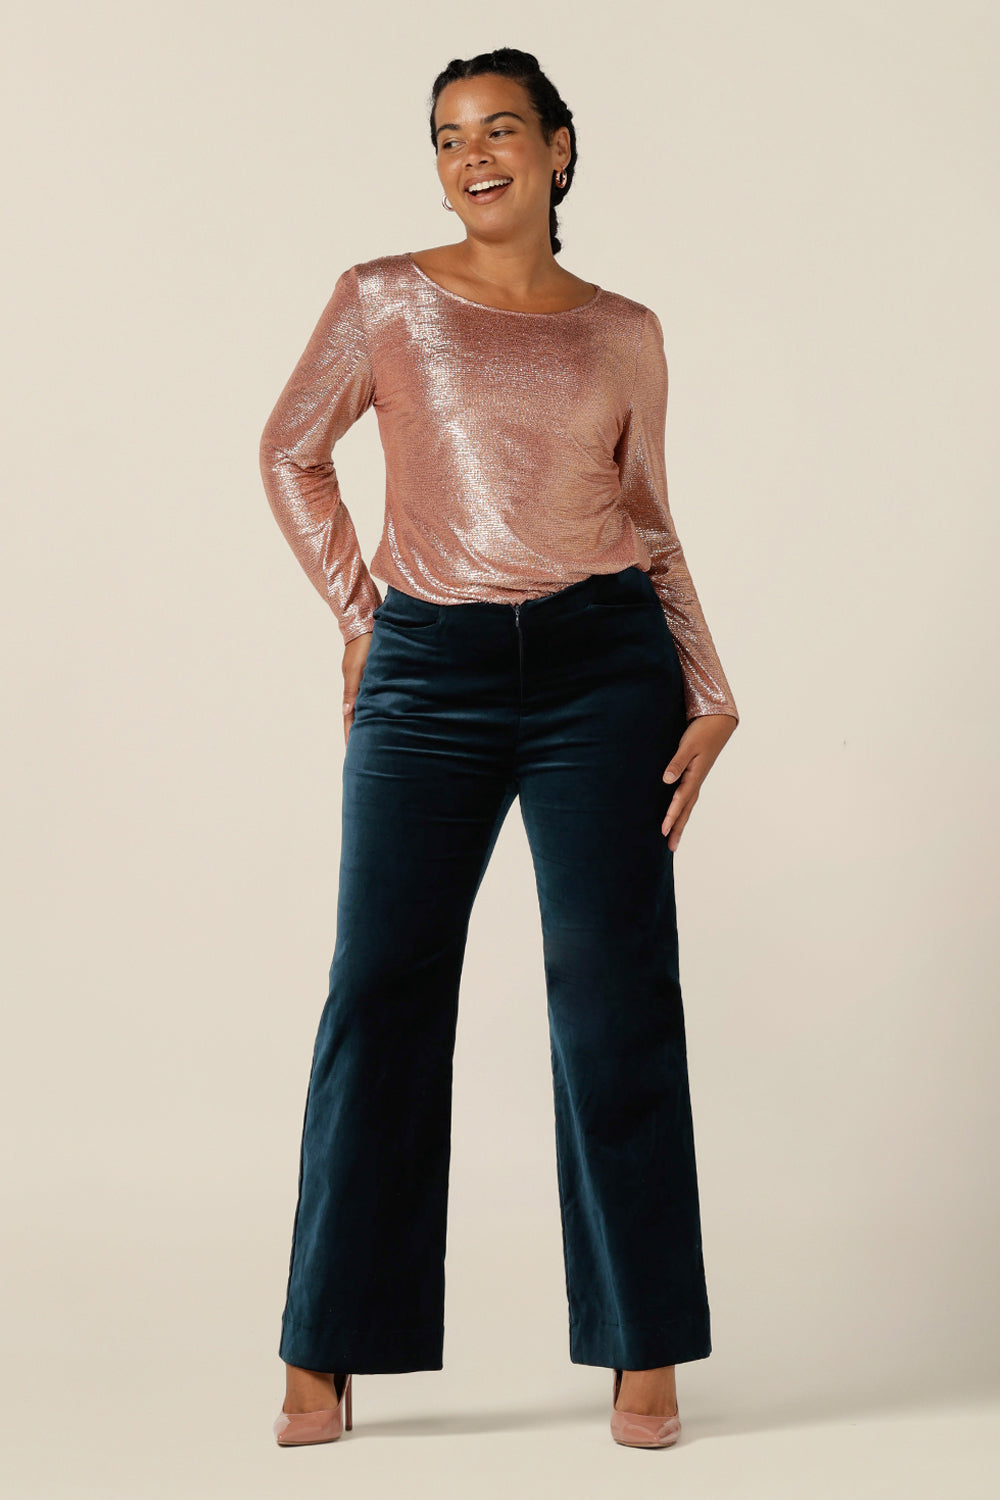 Evening and cocktail wear gets a touch of disco fever with these flared leg, tailored pants in petrol green velveteen. Worn with a sparkly pink, long sleeve top for eveningwear, these special event pants are made in Australia in sizes 8 to 24, petite to plus sizes.